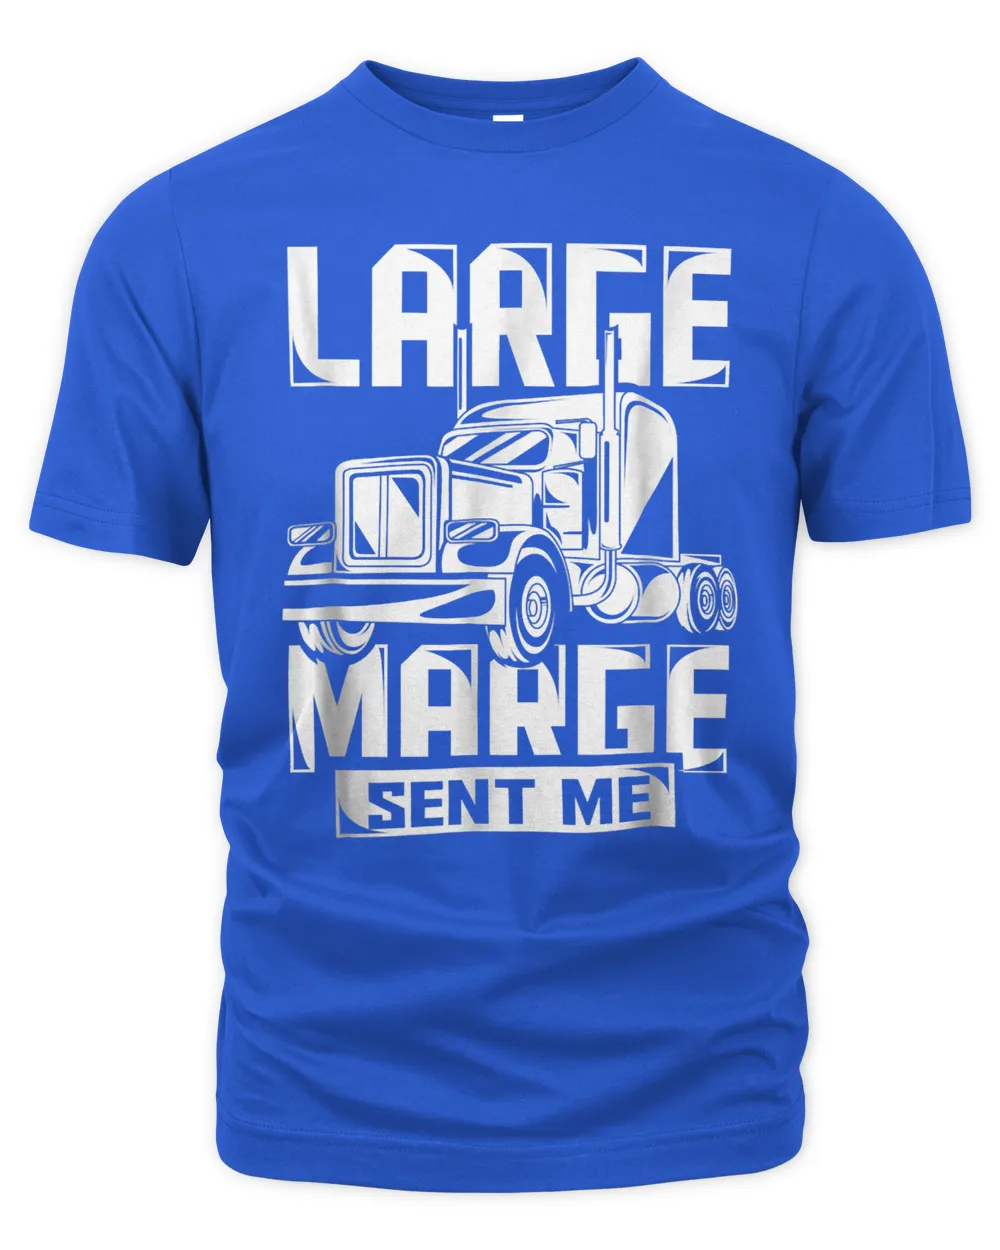 Large Marge Sent Me Funny Trucker Shirt. Truck Driver Gift